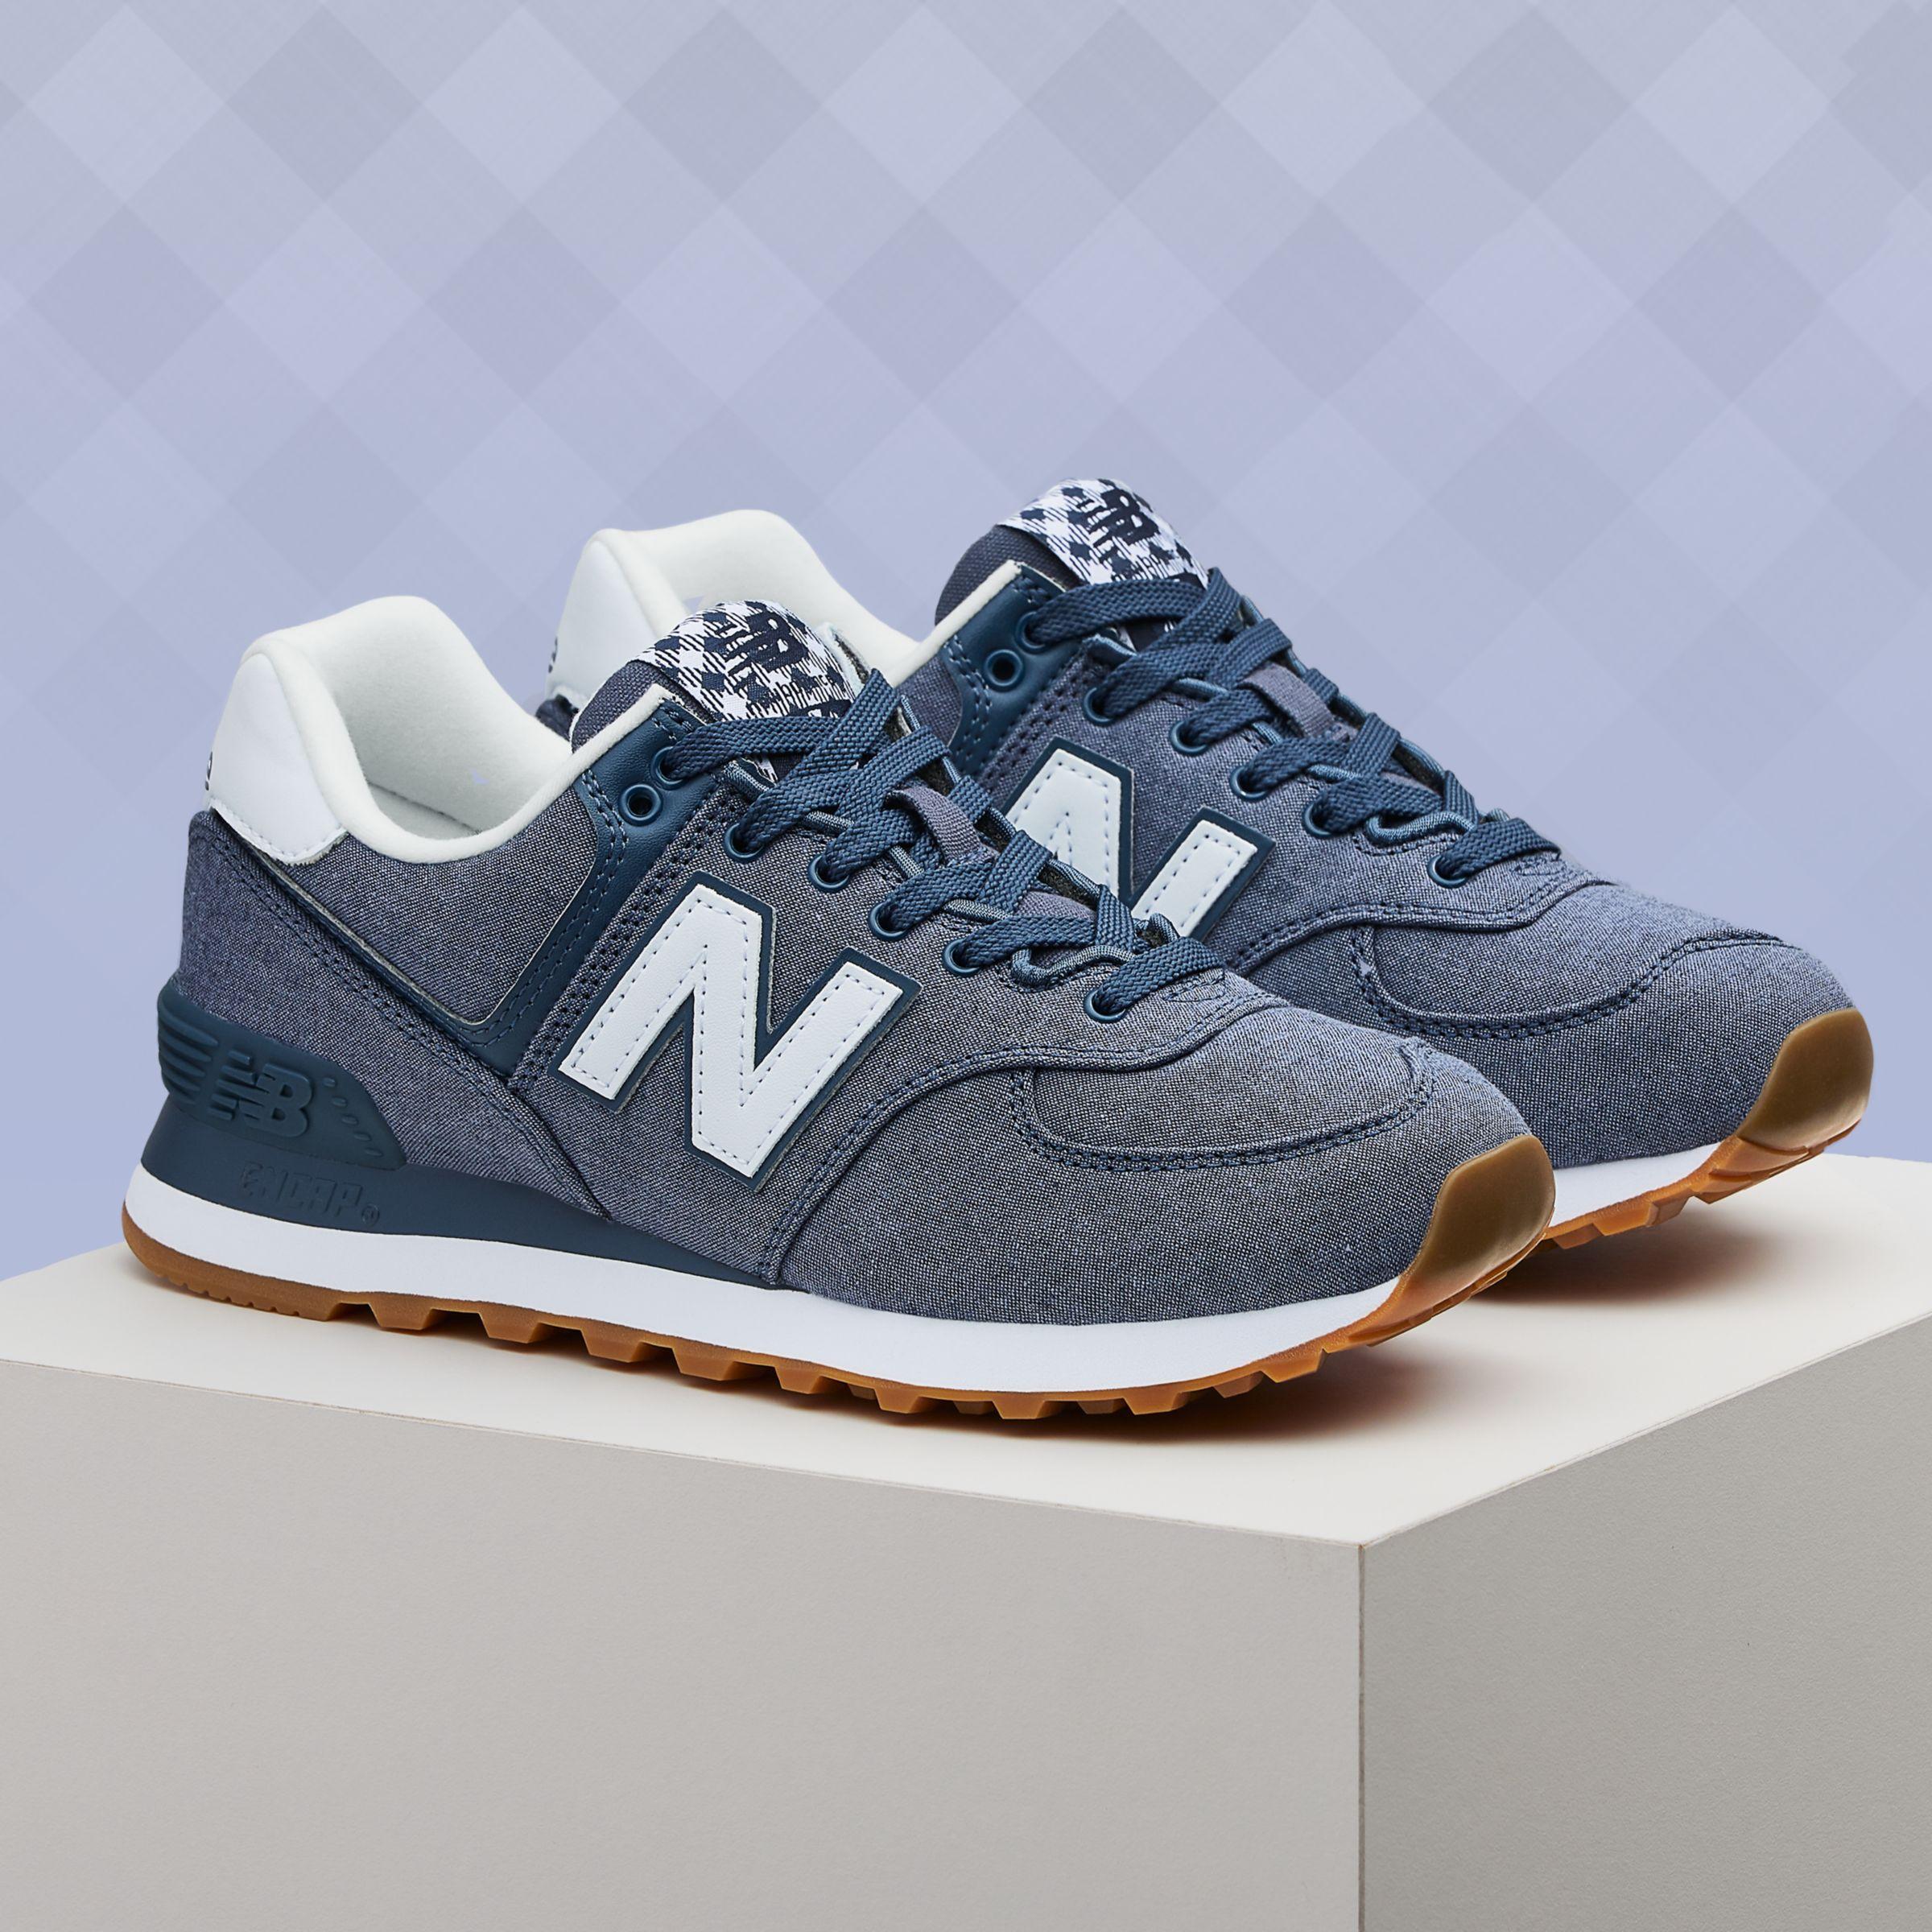 New Balance Rubber 574 Gingham in Blue 